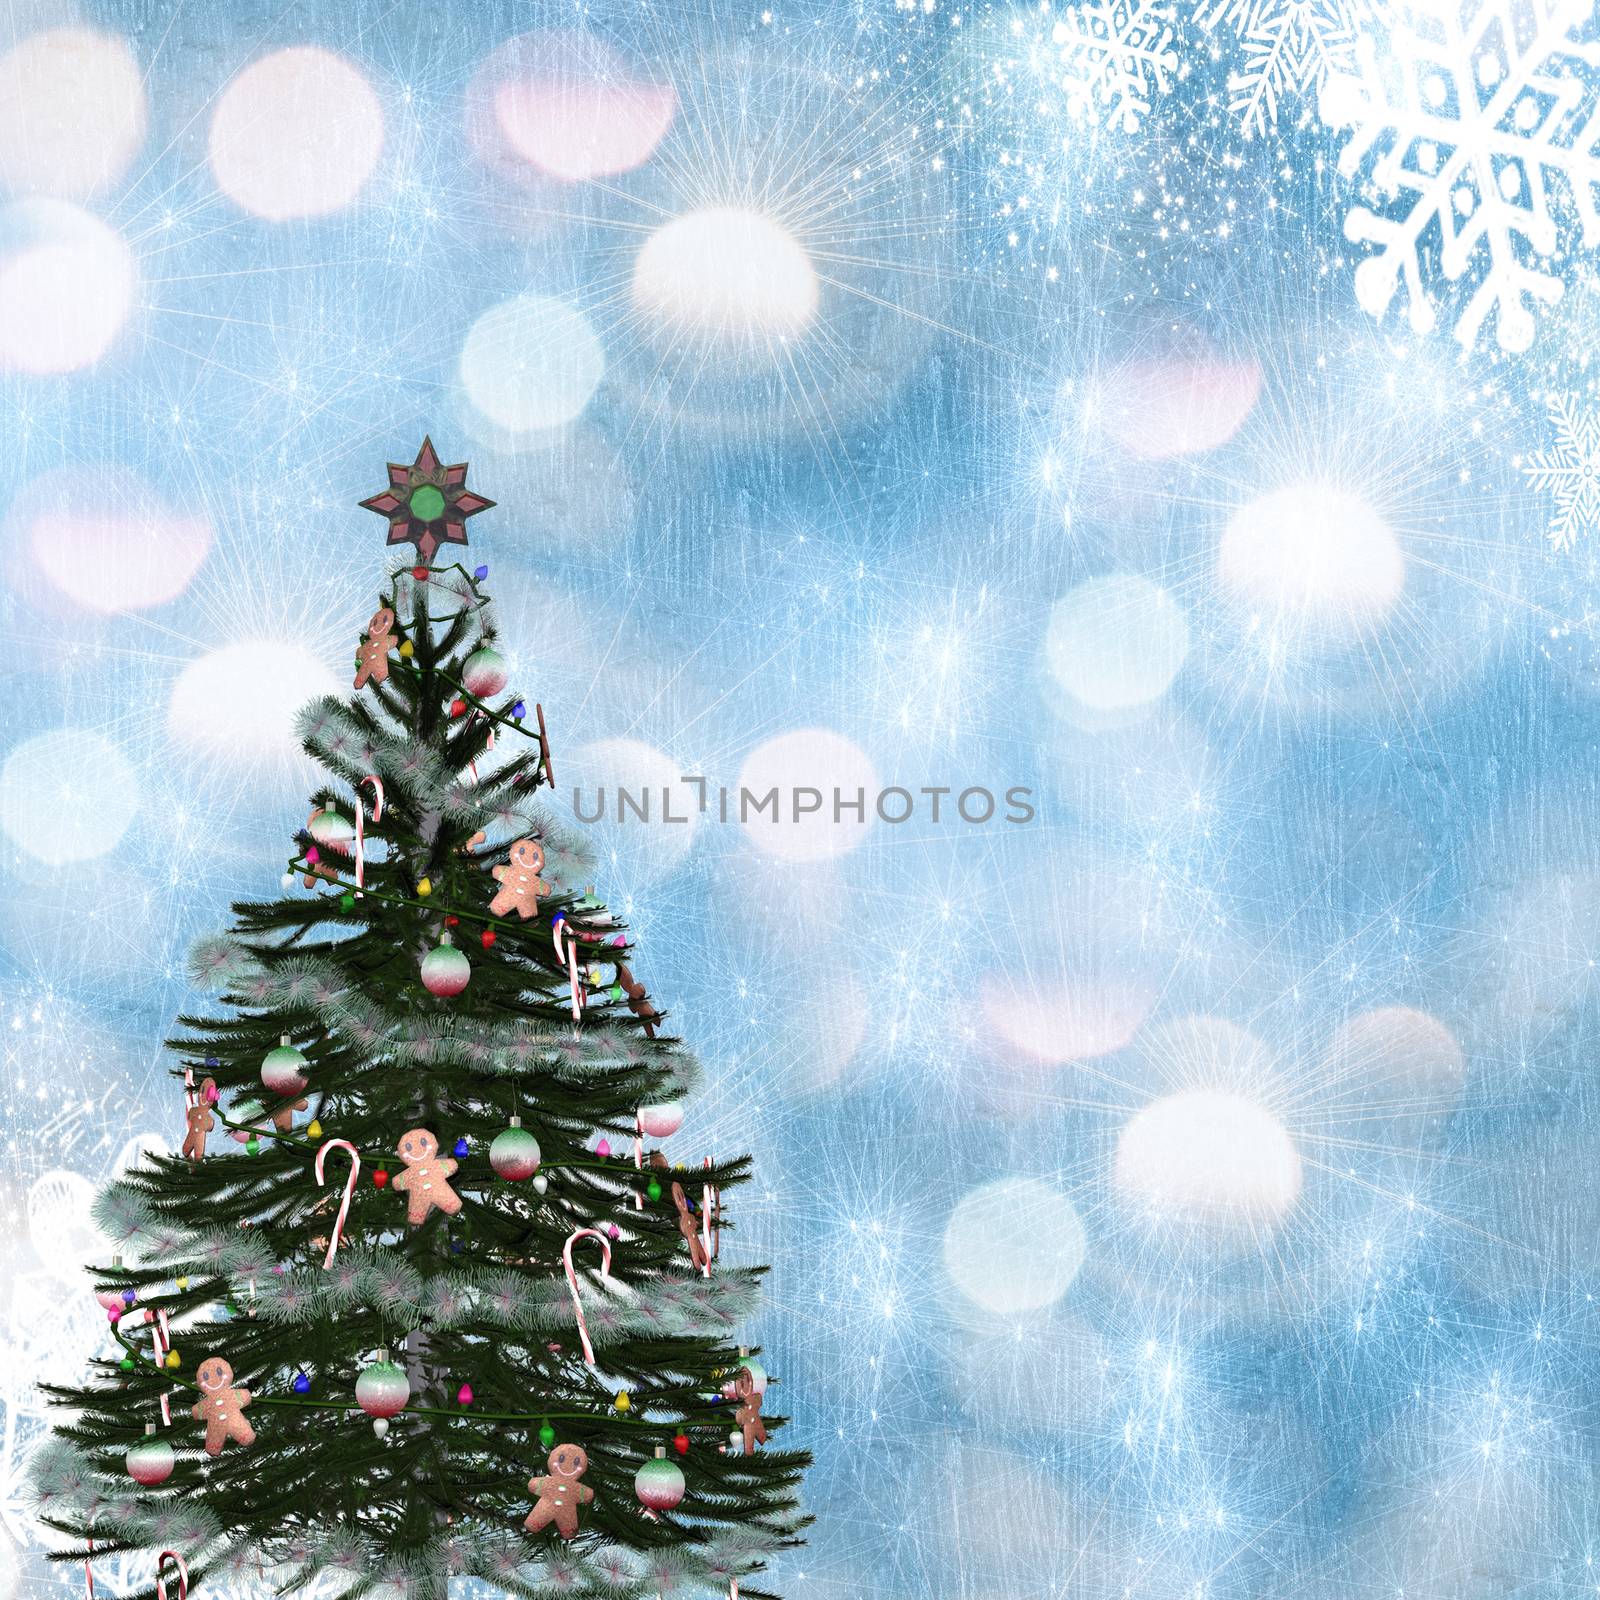 Beautiful Christmas card in vintage style with the image of a Christmas tree decorated with toys on a festive background with lights